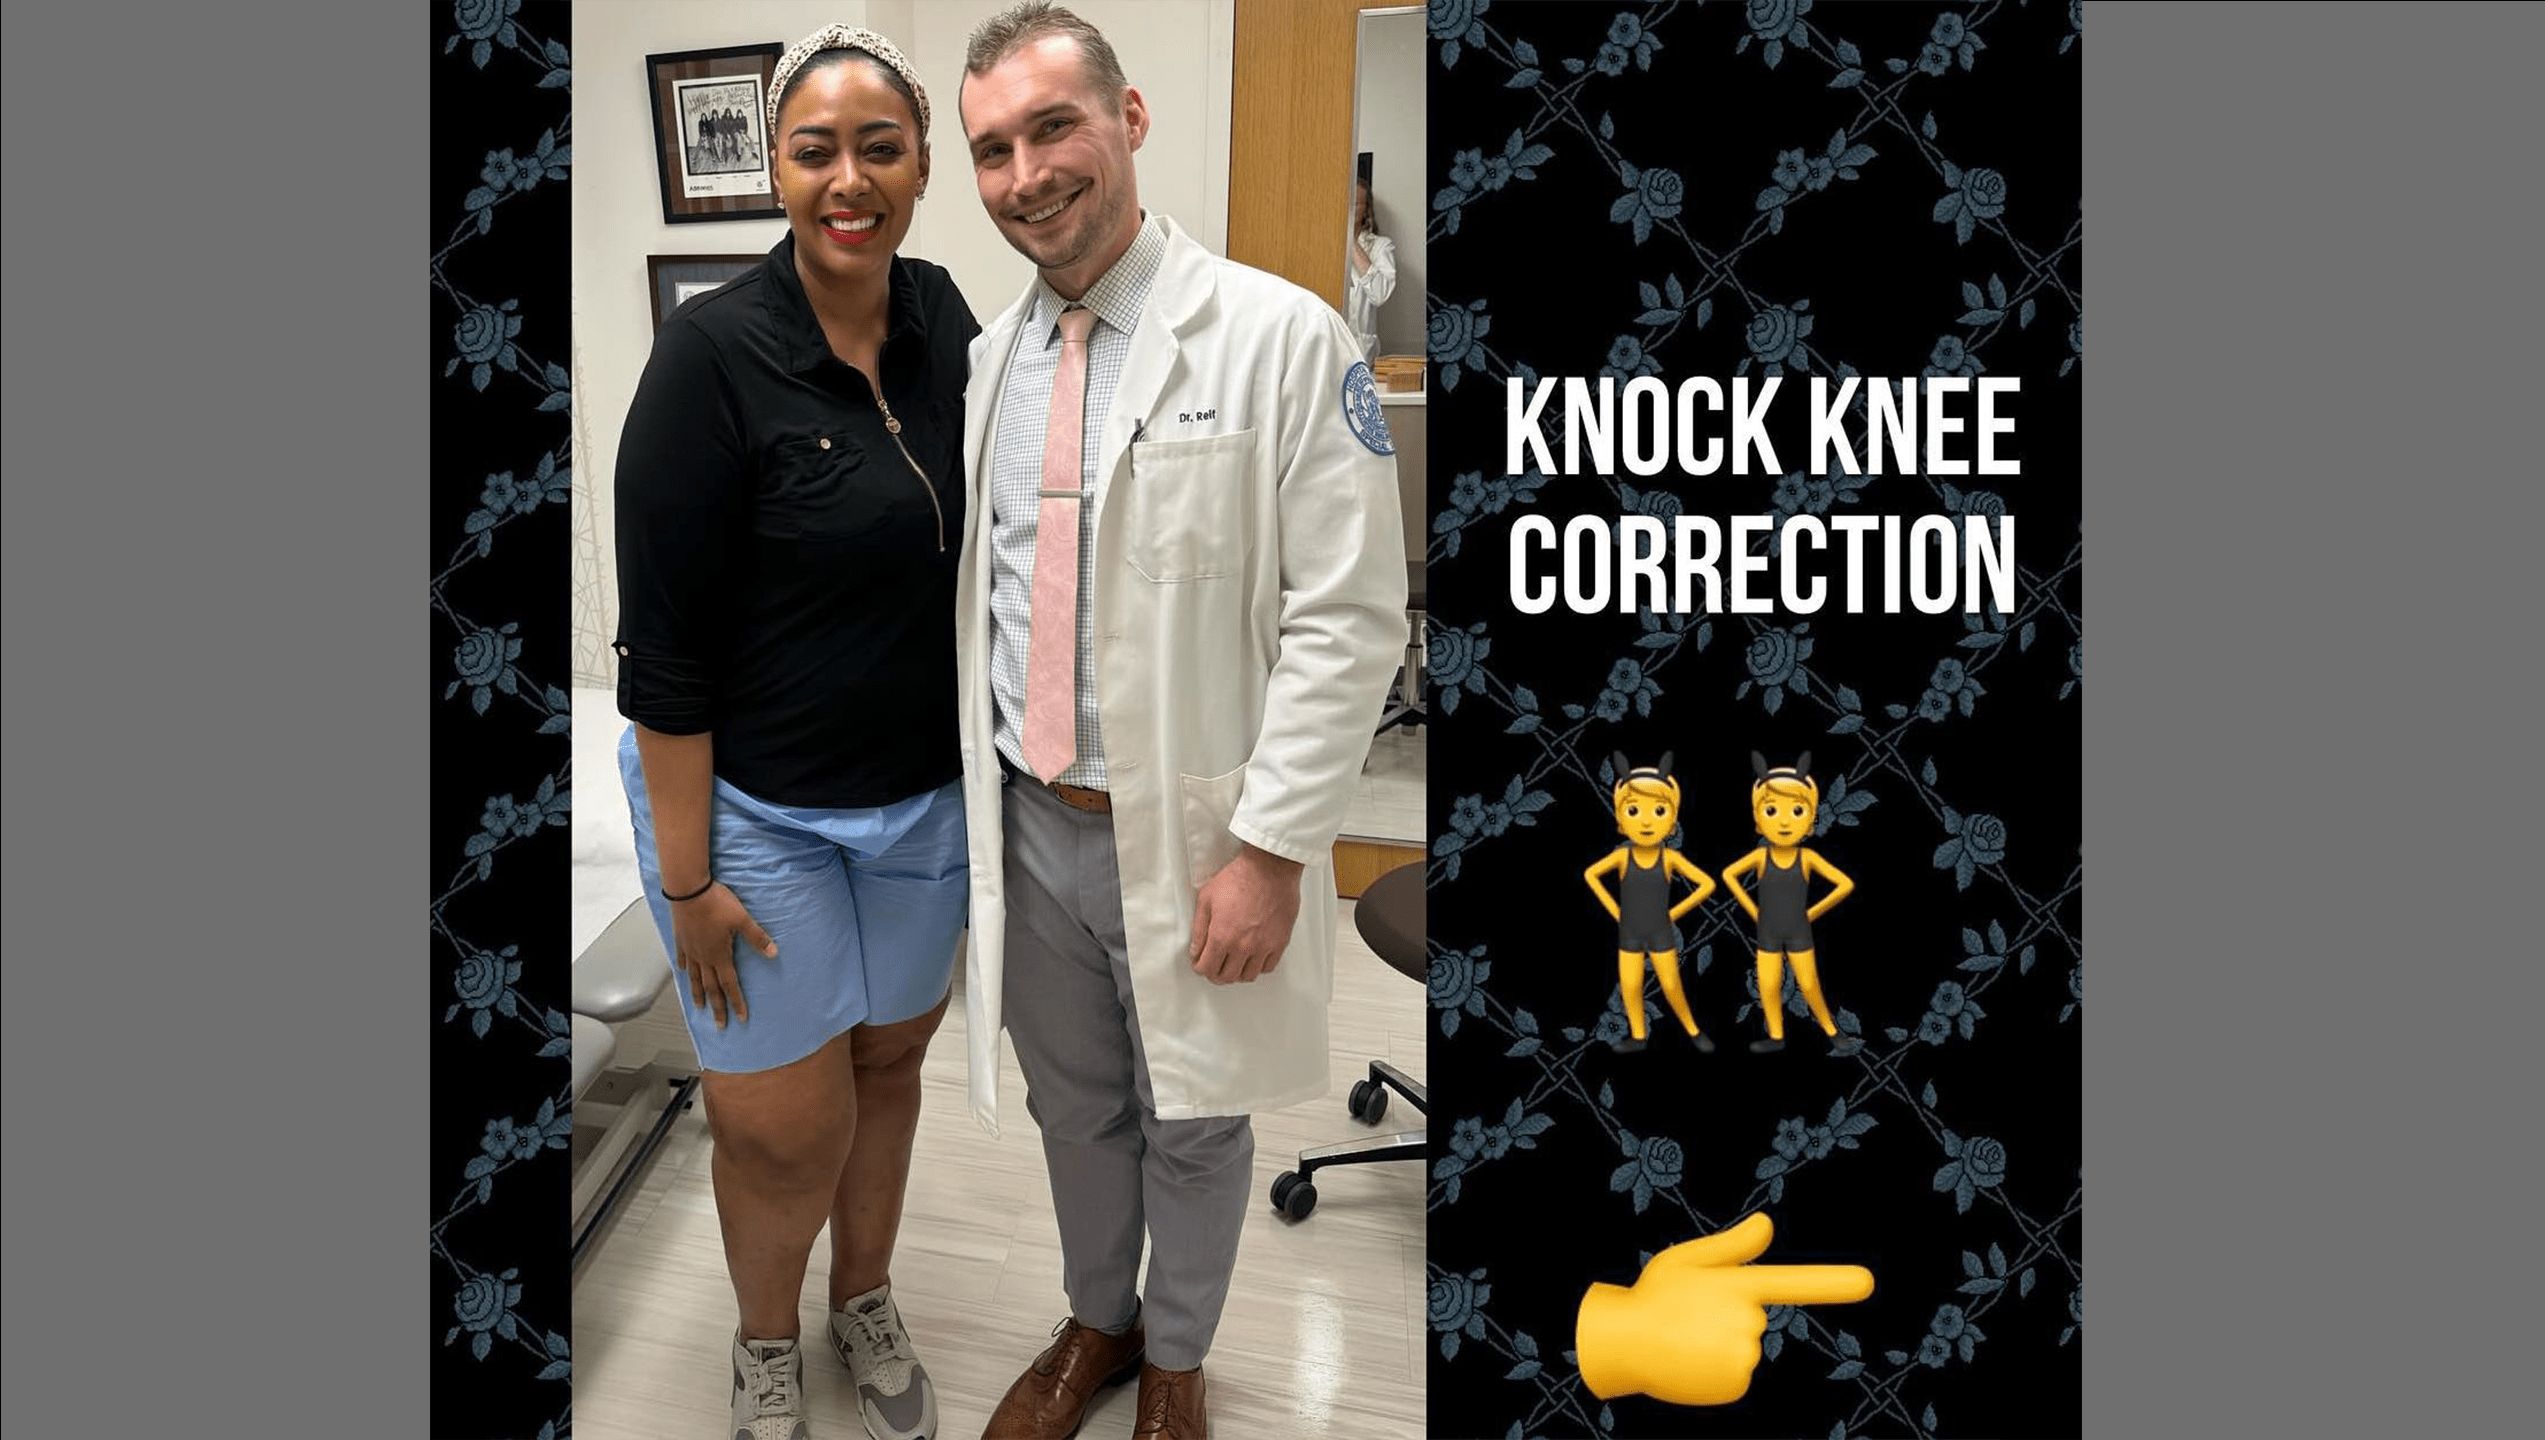 Dr. Reif and Knock Knee Patient